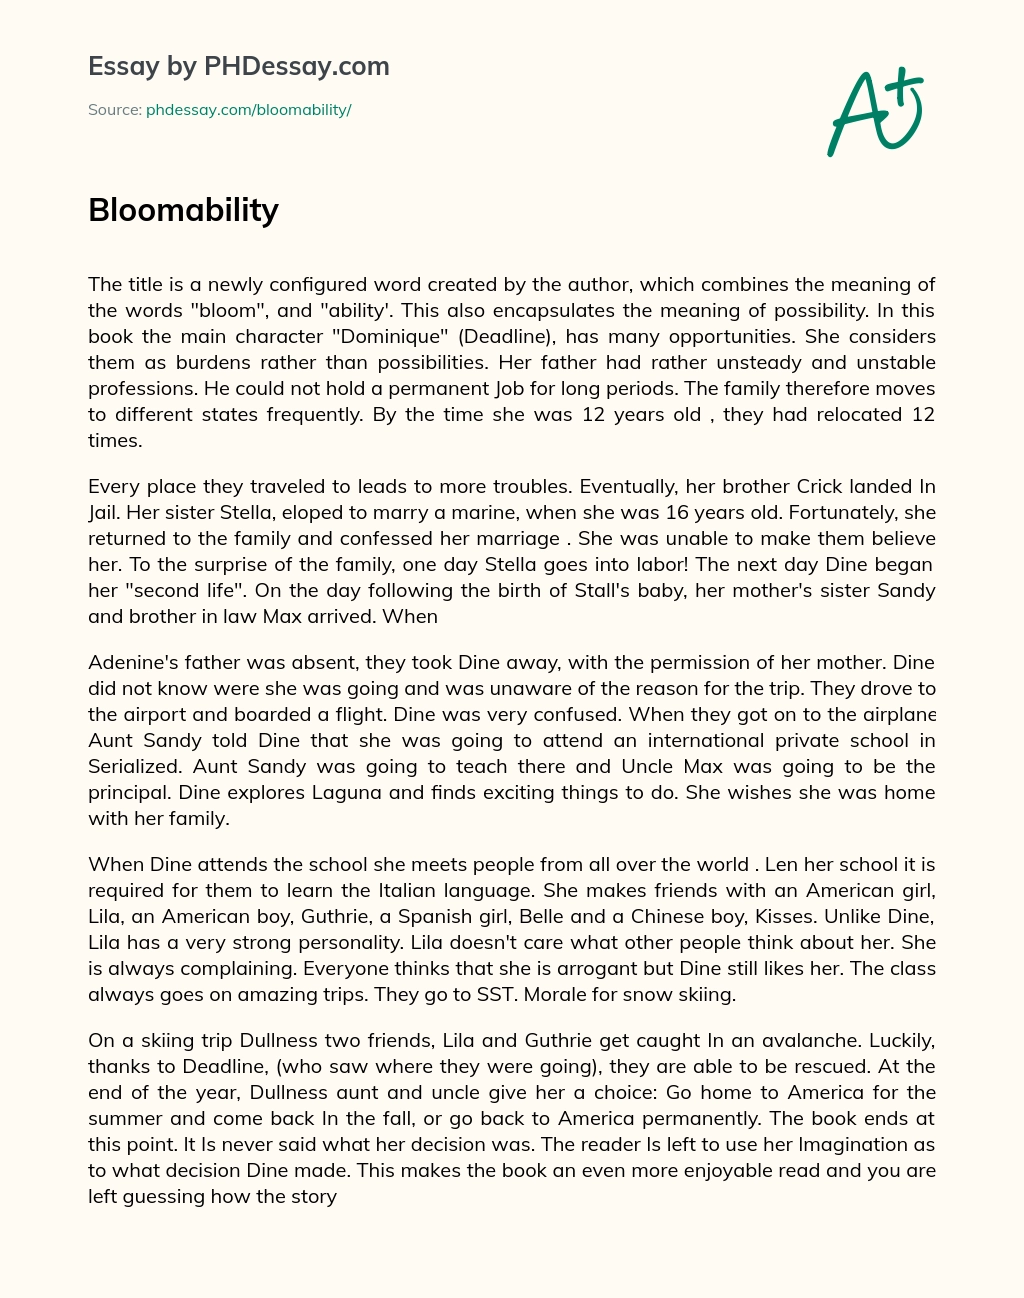 Deadline’s Bloomability: A story of a girl’s journey from burden to possibility essay